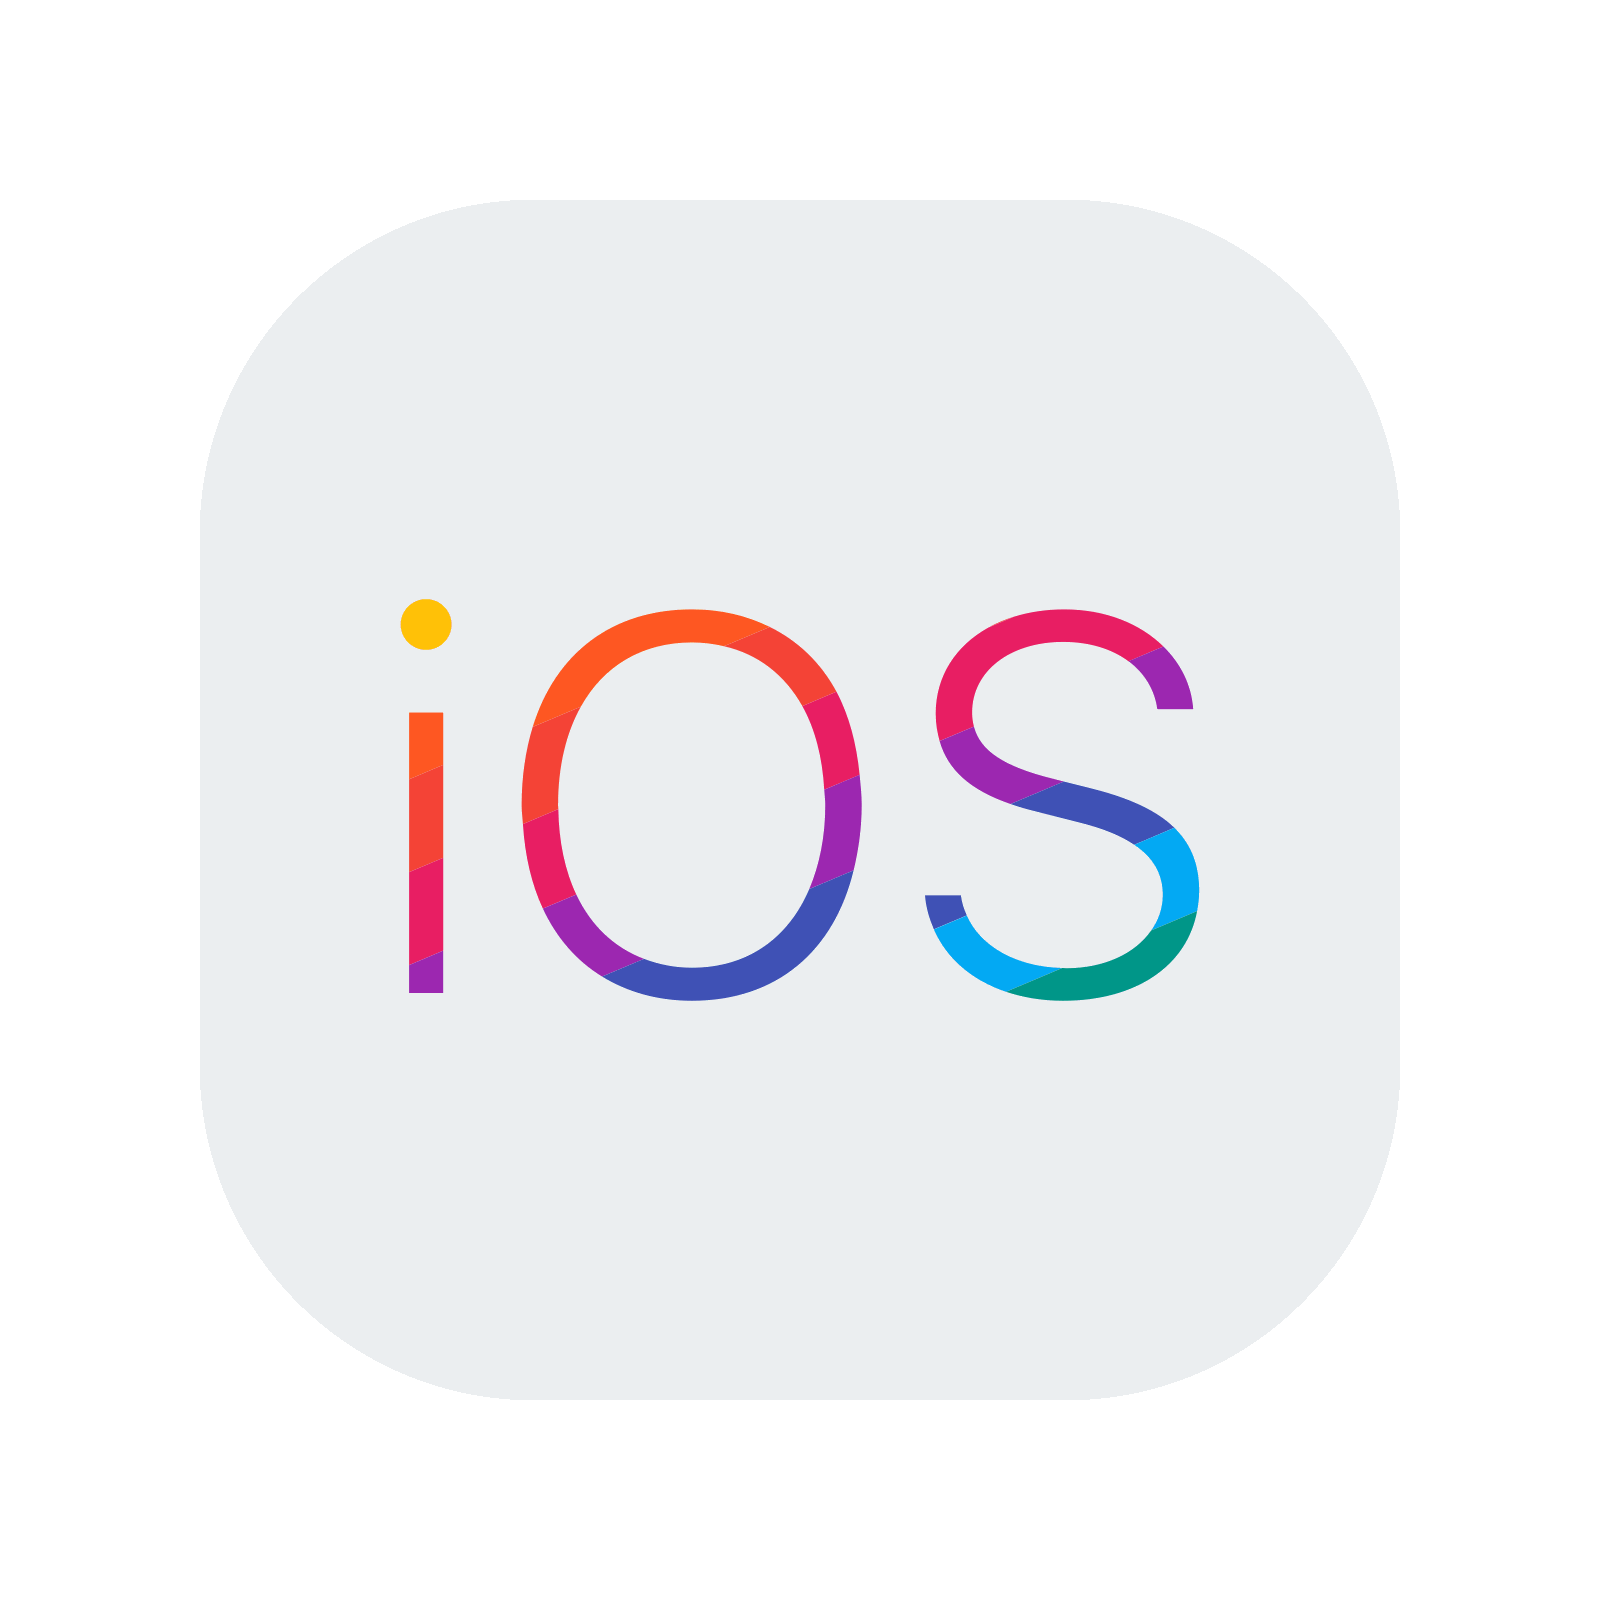 iOS Logo Icon - free download, PNG and vector